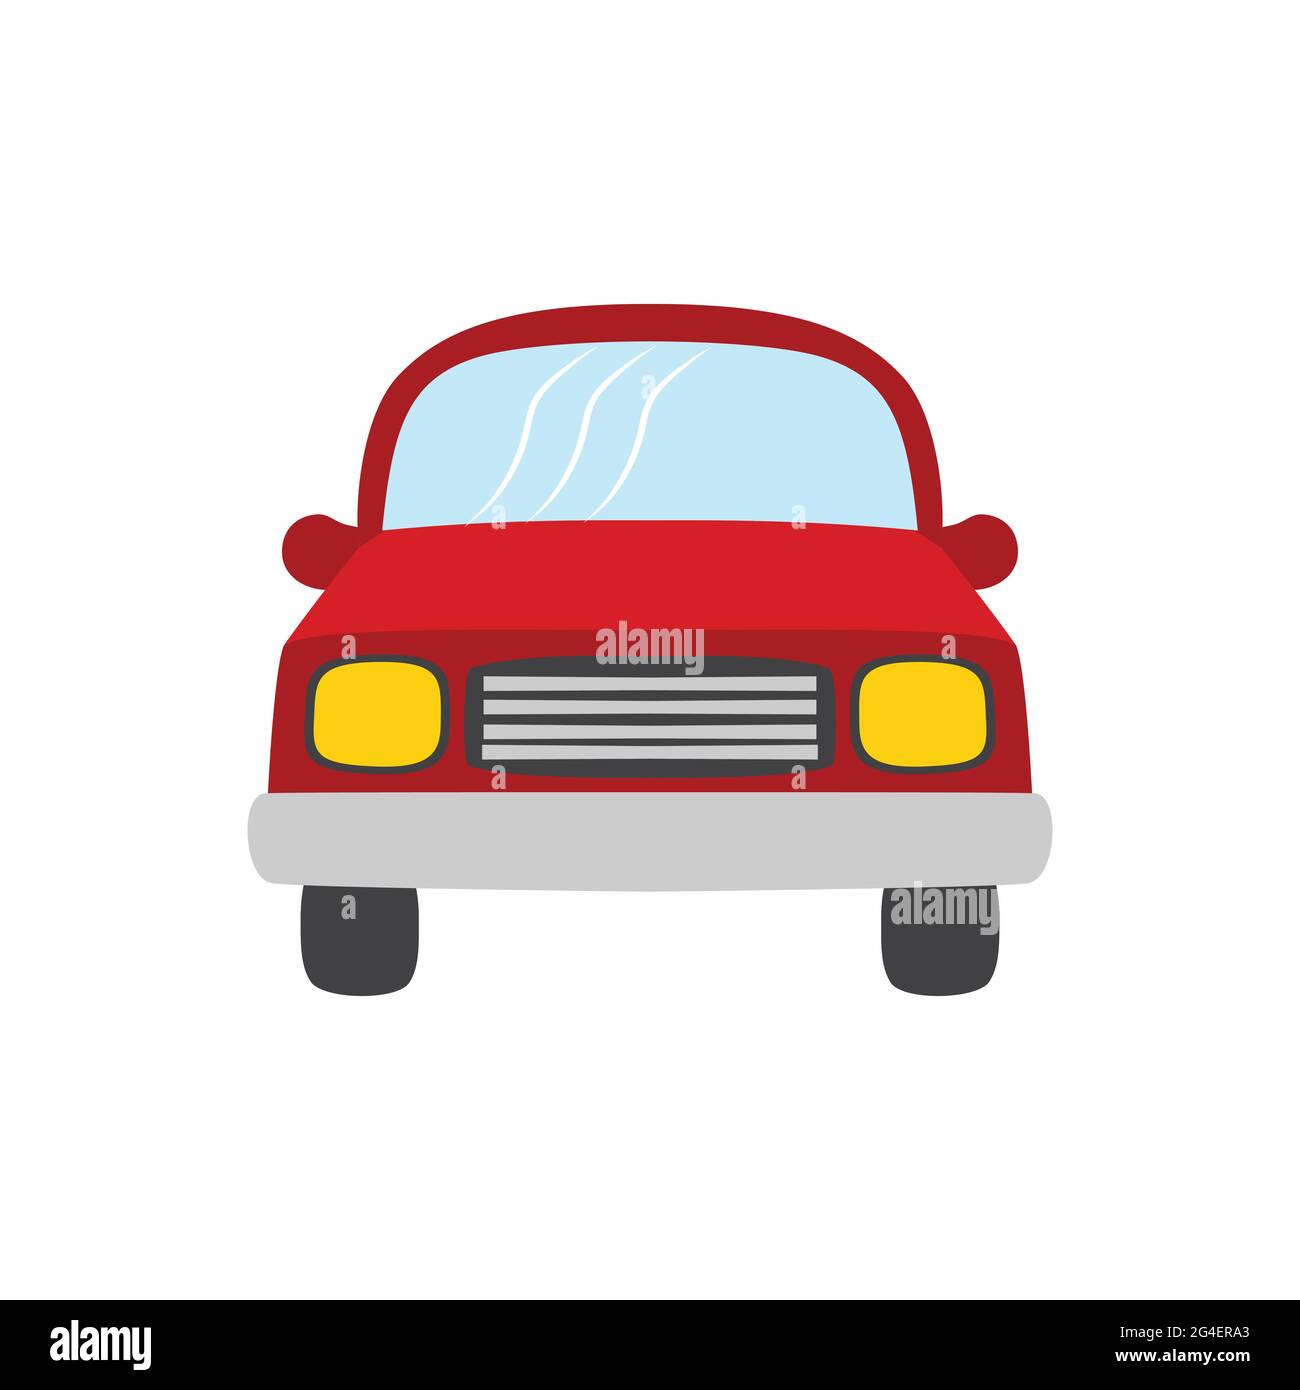 Red color vector illustration car, car isolated on white background, flat style red car front view, simple design vehicle symbol Stock Vector